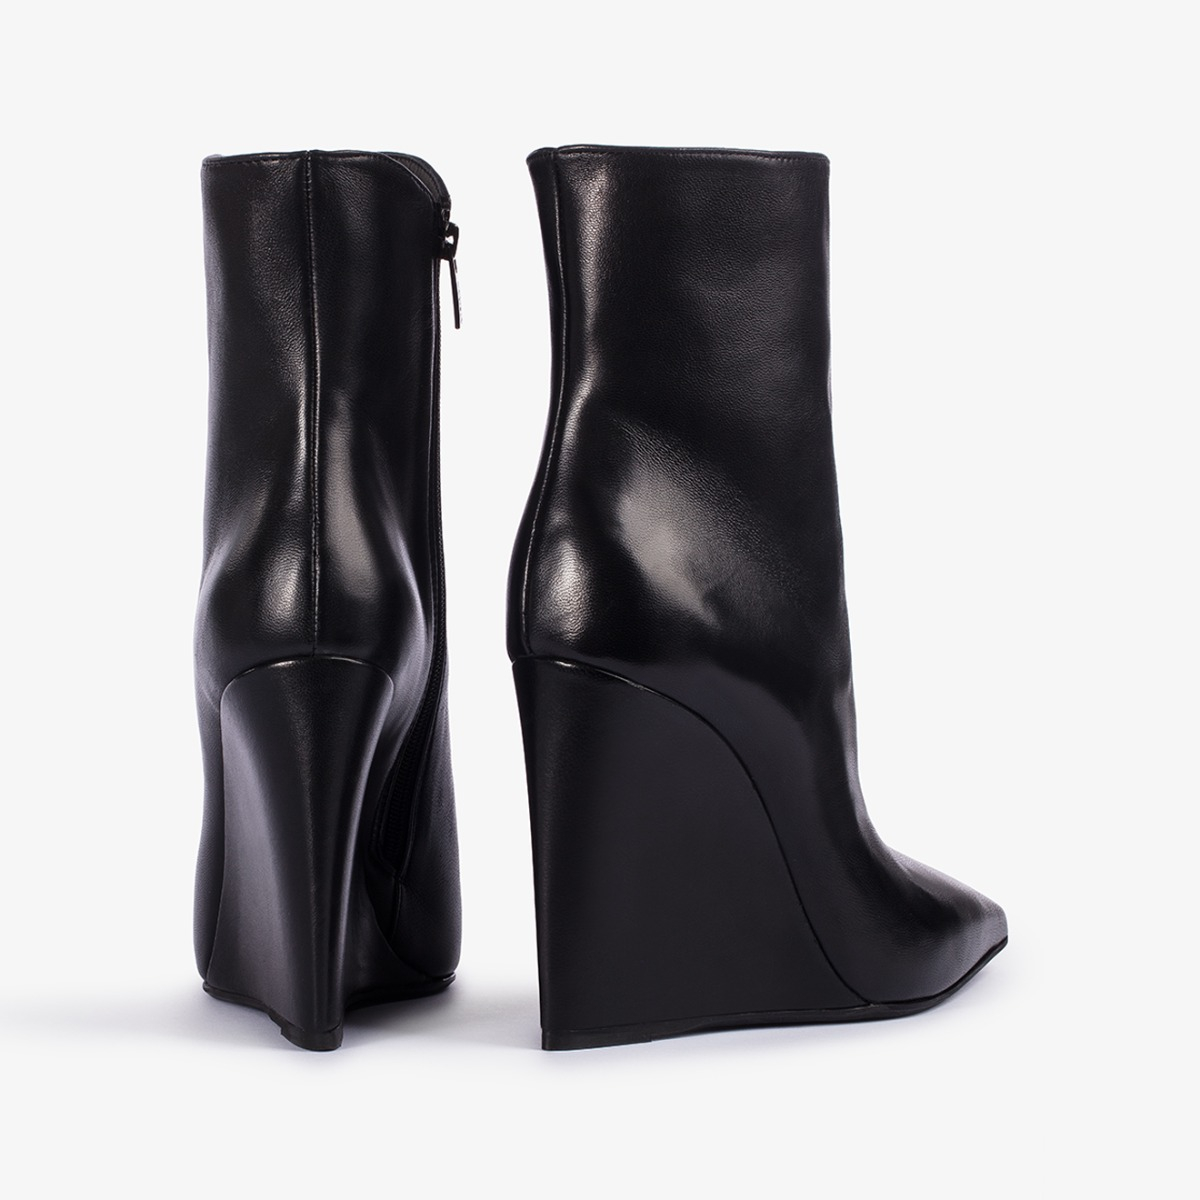 KIRA ANKLE BOOT 120 mm - Le Silla | Official Online Store